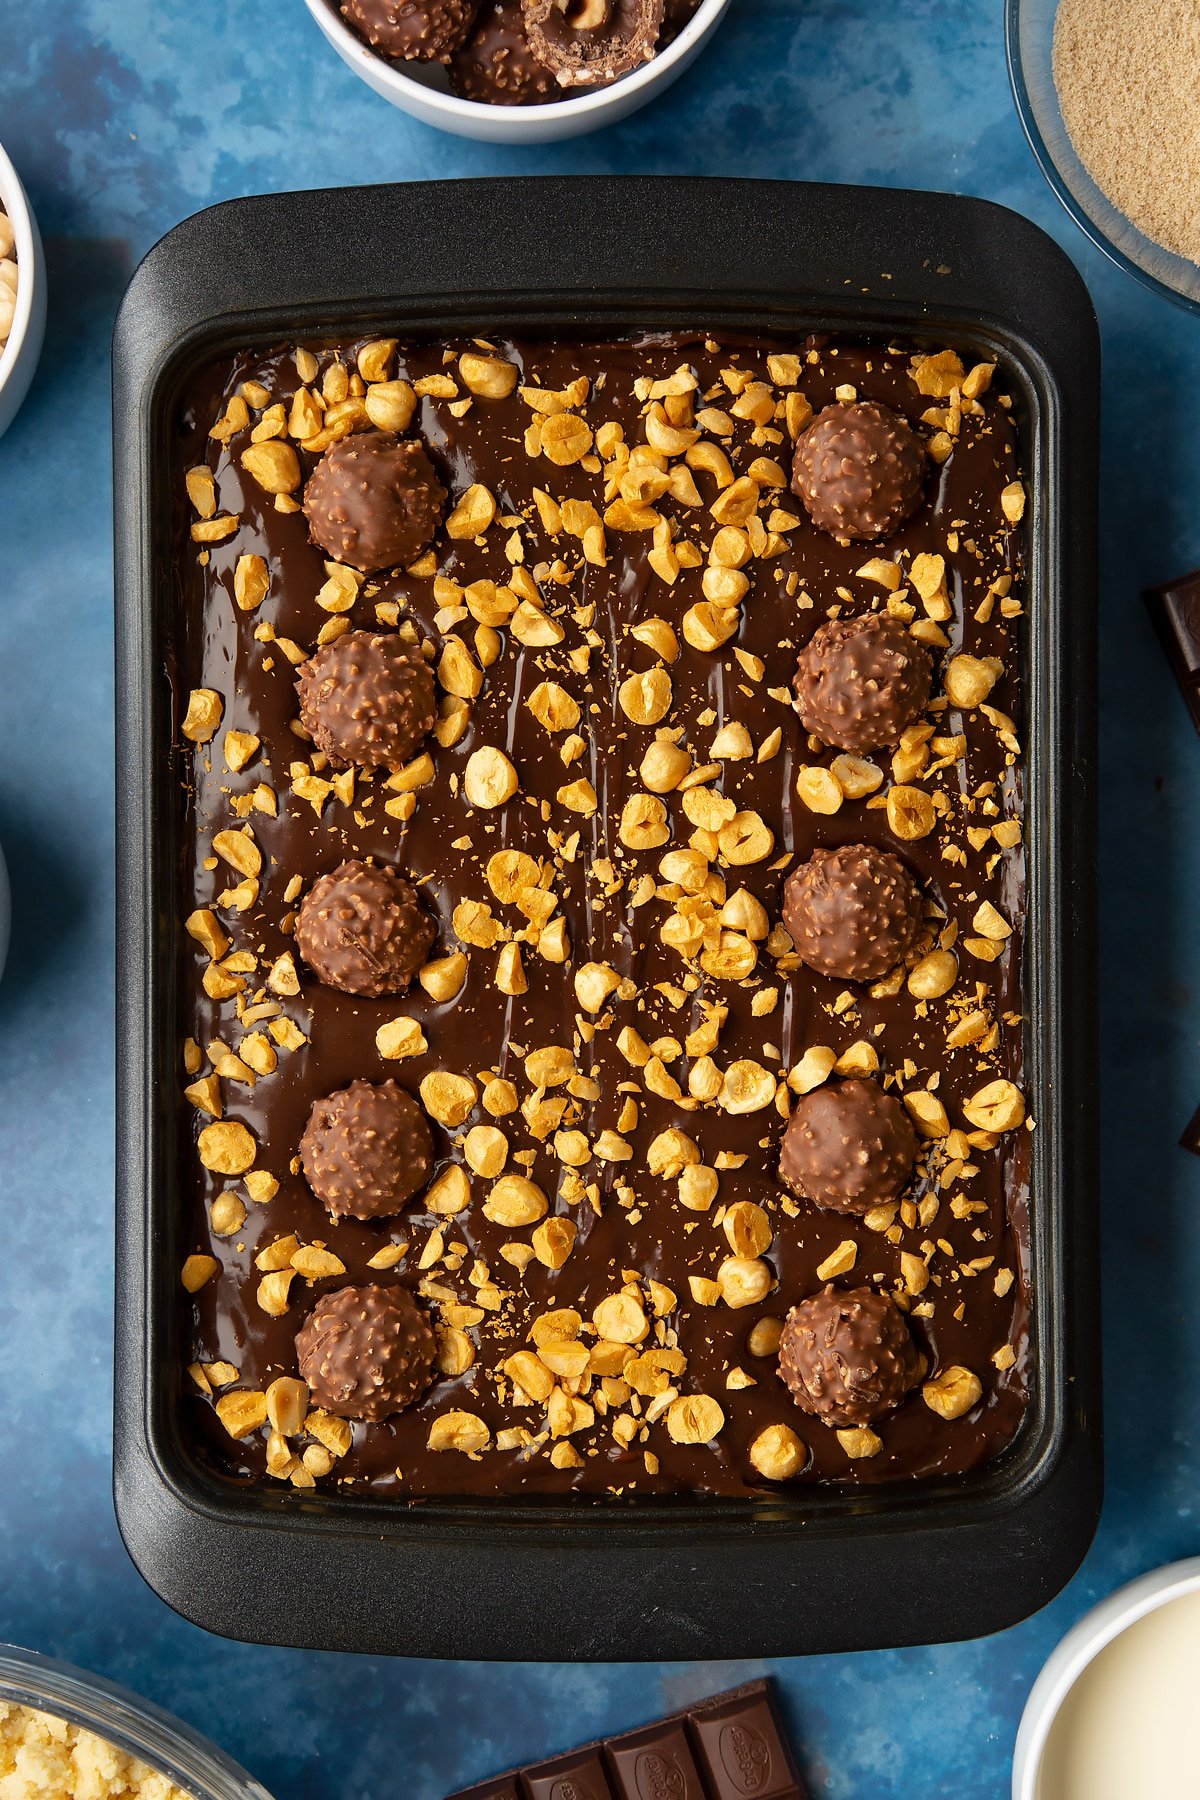 Millionaire's shortbread scatter with golden hazelnuts and topped with Ferrero Rocher. Ingredients to make a Ferrero Rocher slice surround the tray.